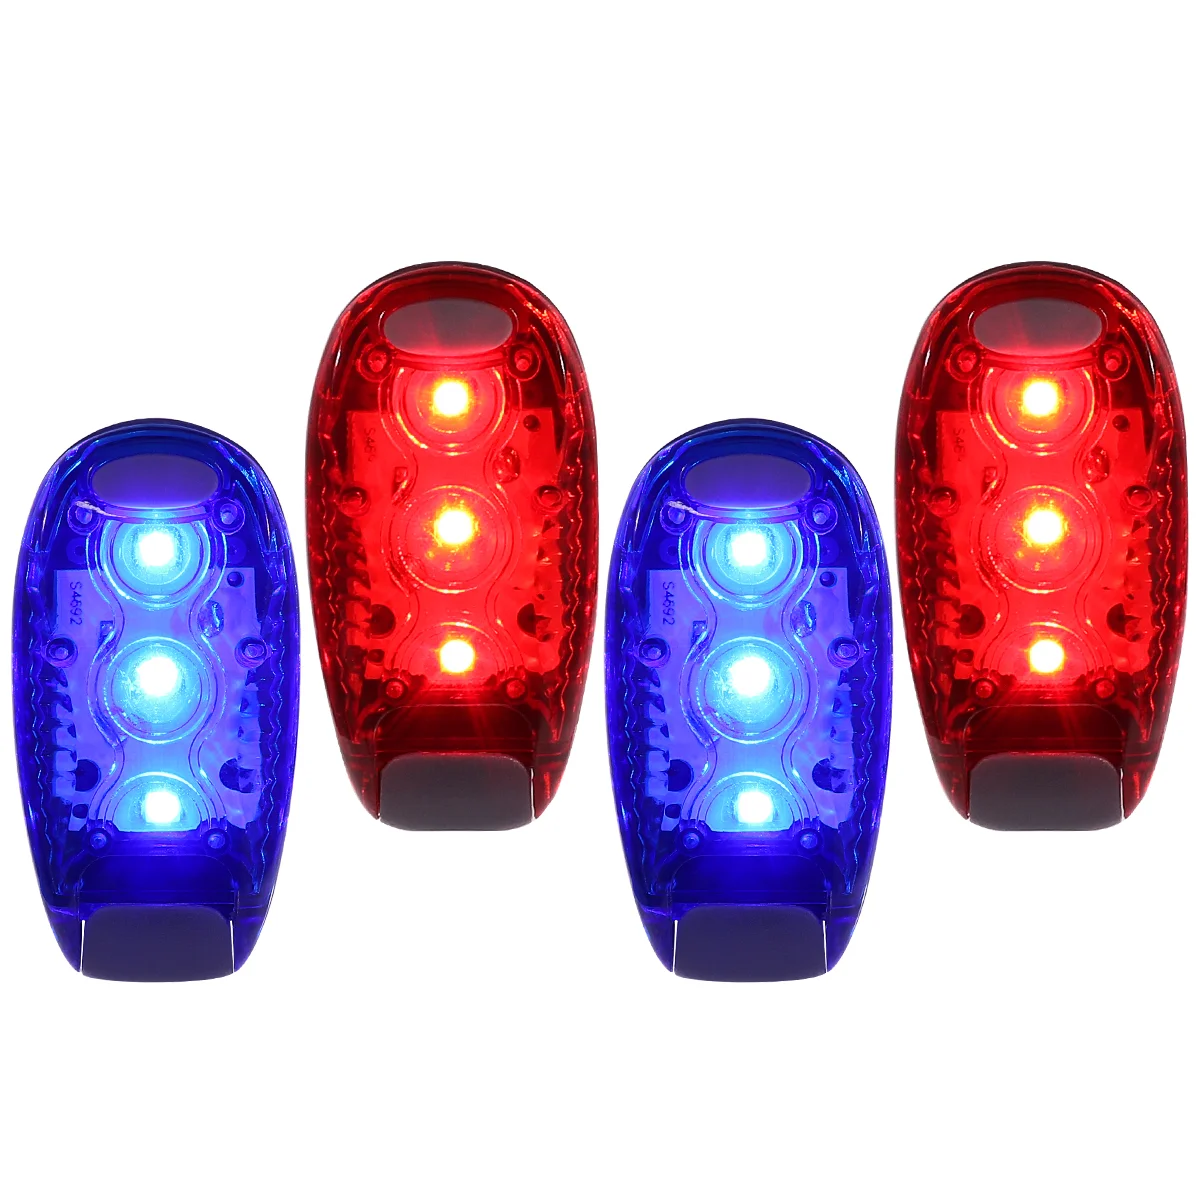 

WINOMO 4pcs Safety LED Light for Runners Bikes Dogs Kids Boats Flashing Warning Strobe High Visibility Clip Light for Running